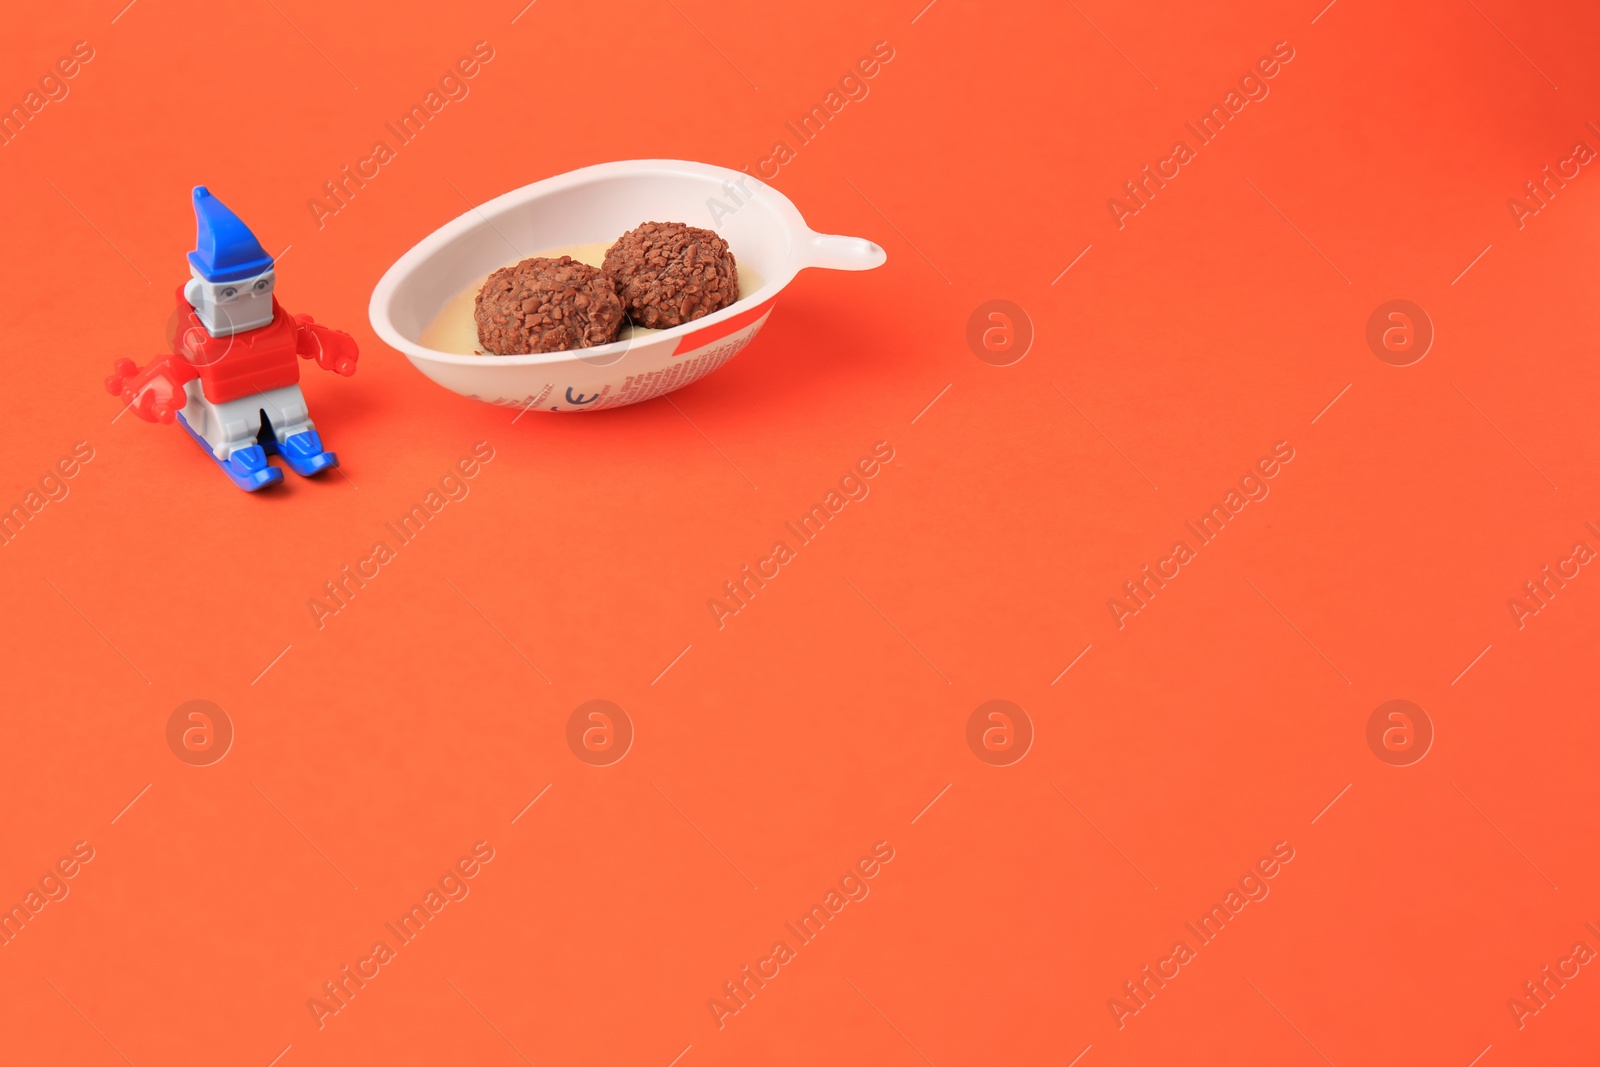 Photo of Slynchev Bryag, Bulgaria - May 25, 2023: Half of Kinder Joy Egg with sweet candies and toy on orange background, space for text